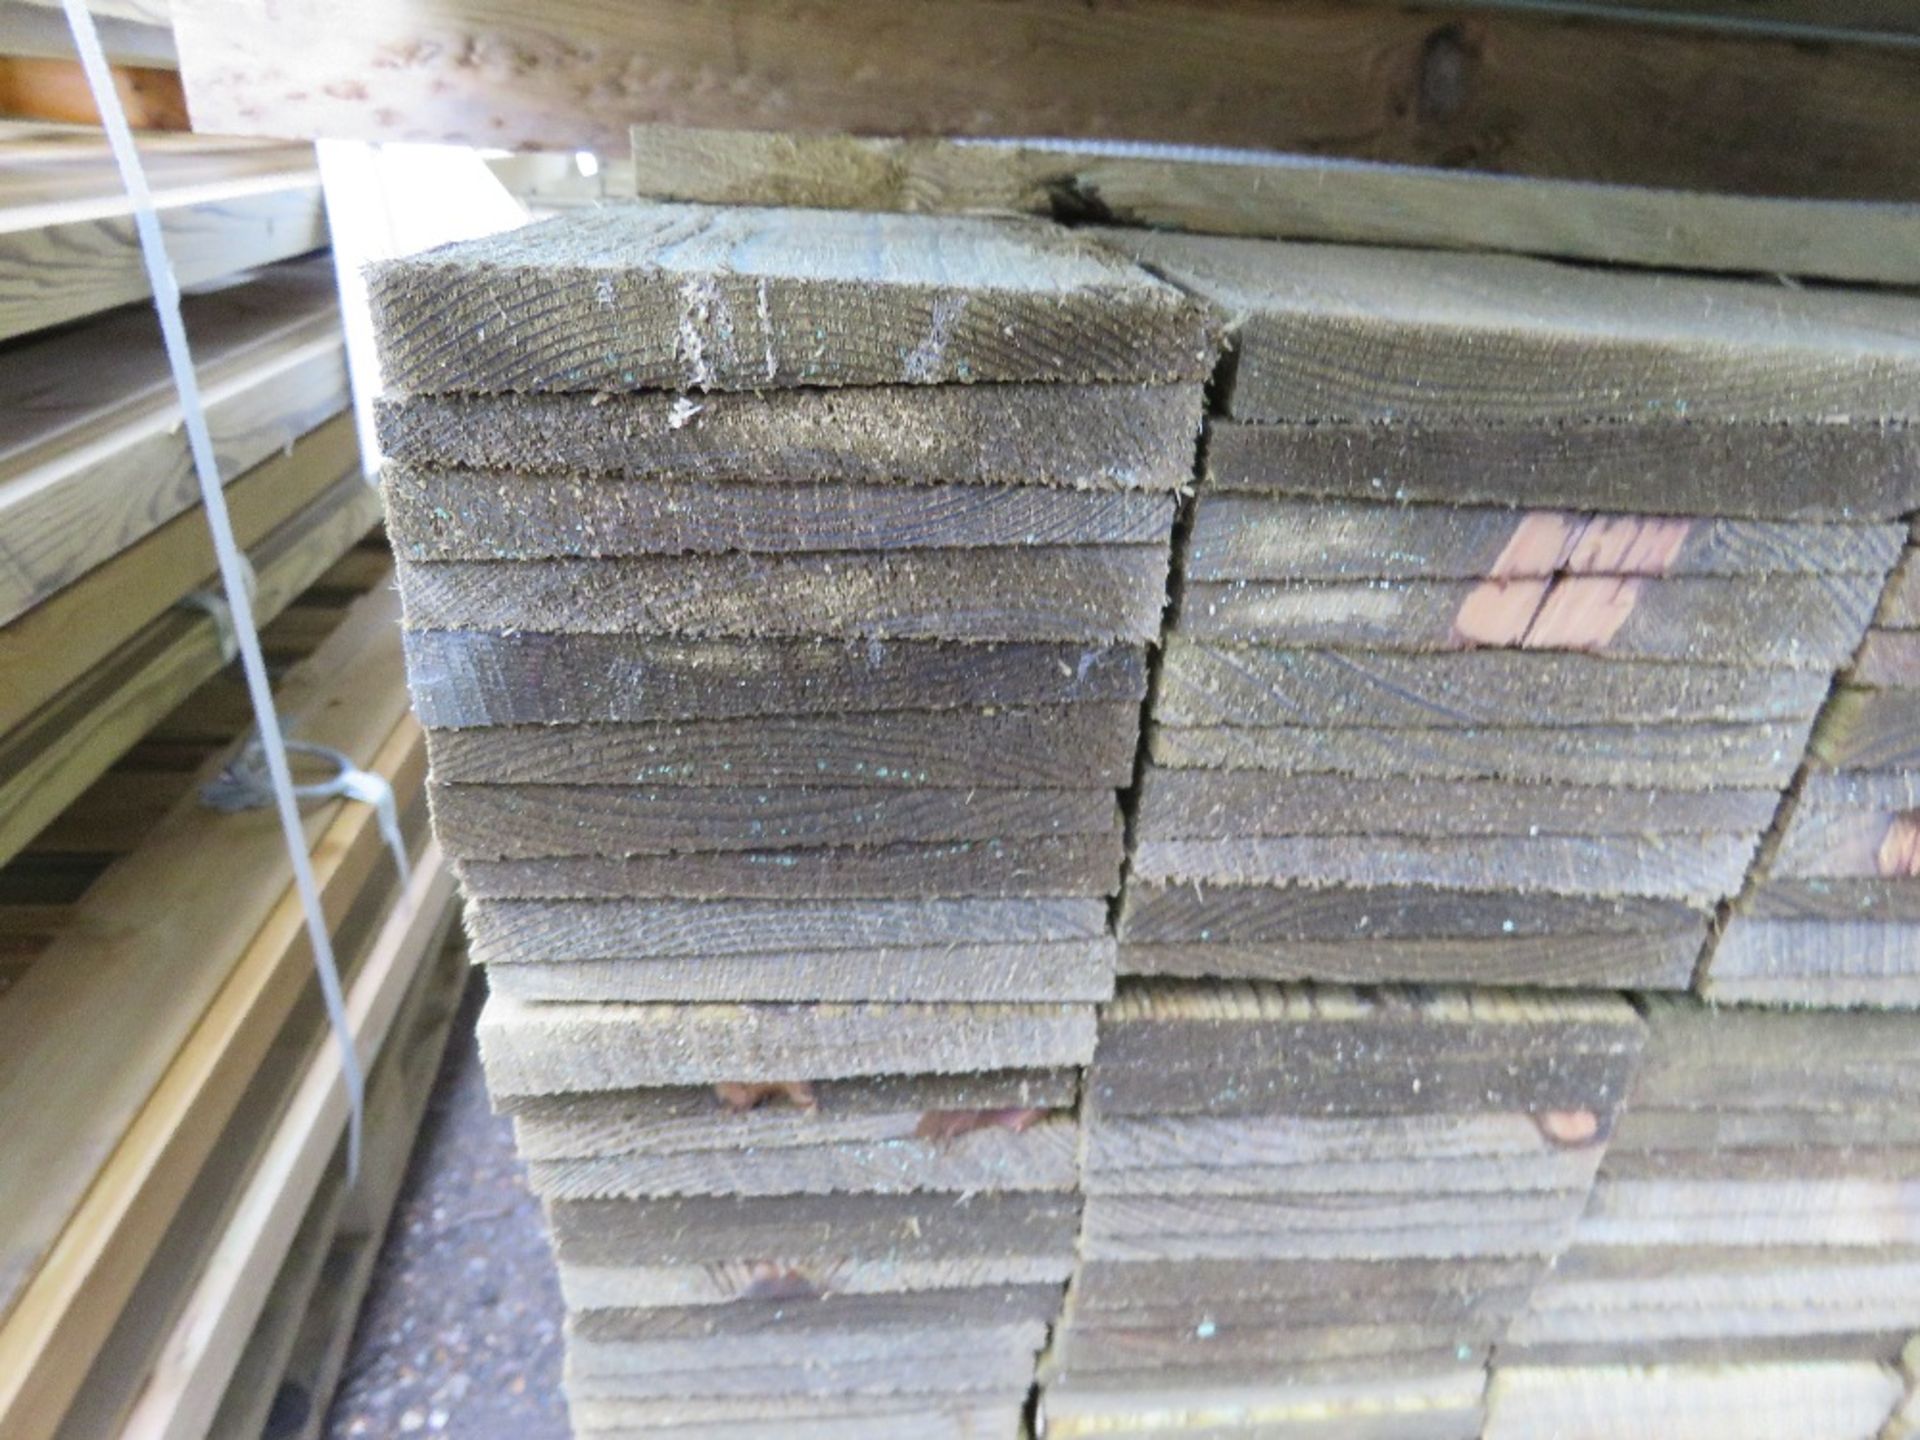 LARGE PACK OF TREATED FEATHER EDGE FENCE CLADDING TIMBER BOARDS. 1.65M LENGTH X 100MM WIDTH APPROX. - Image 3 of 3